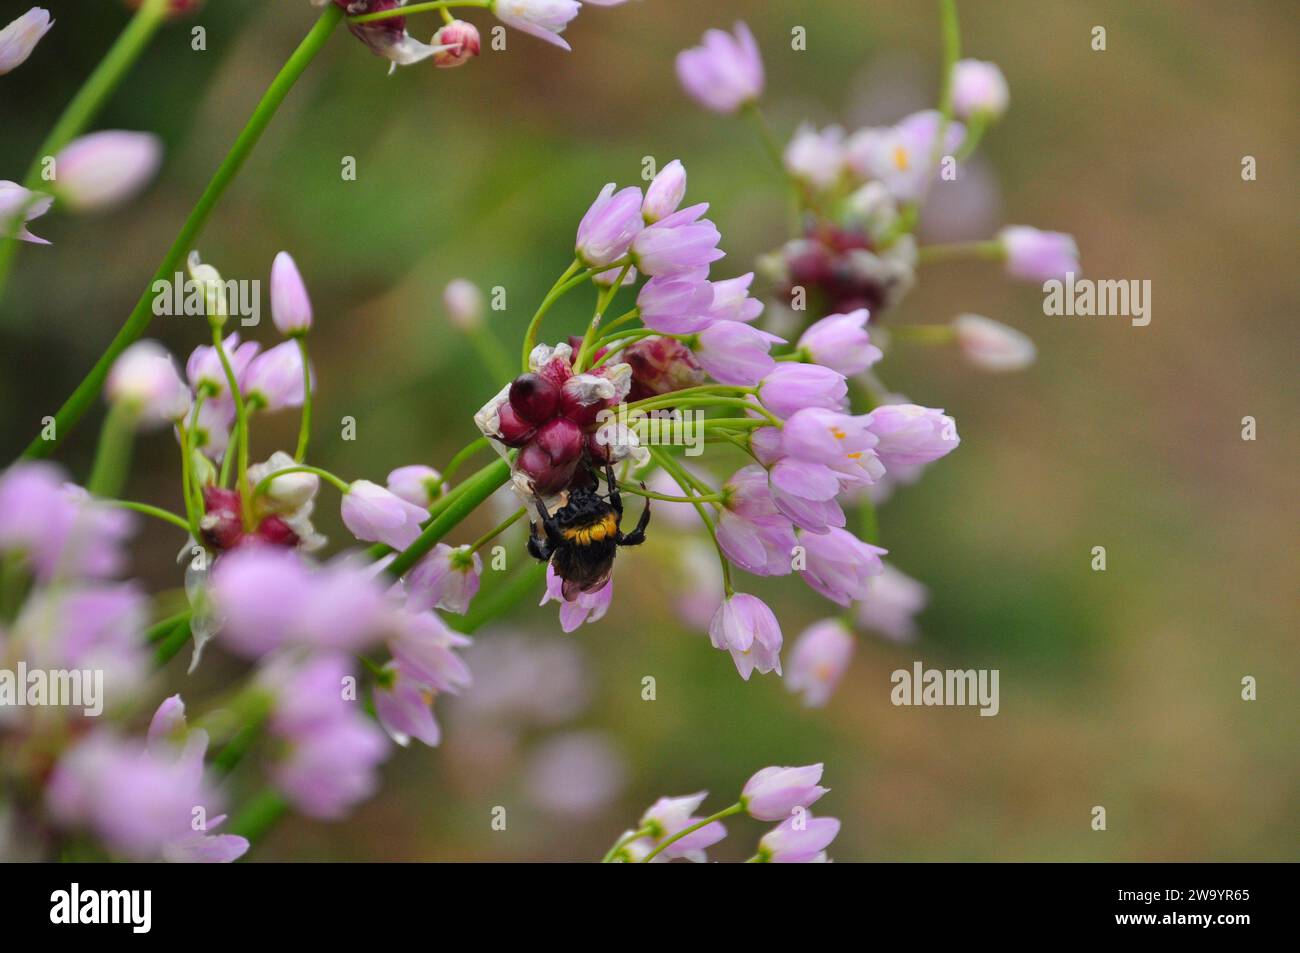 A wet bee on the Aerial bulbils of a Rosy garlic flower 'Allium roseum' in the rain on St Marys, Isles of Scilly, Cornwall, England, UK. Stock Photo